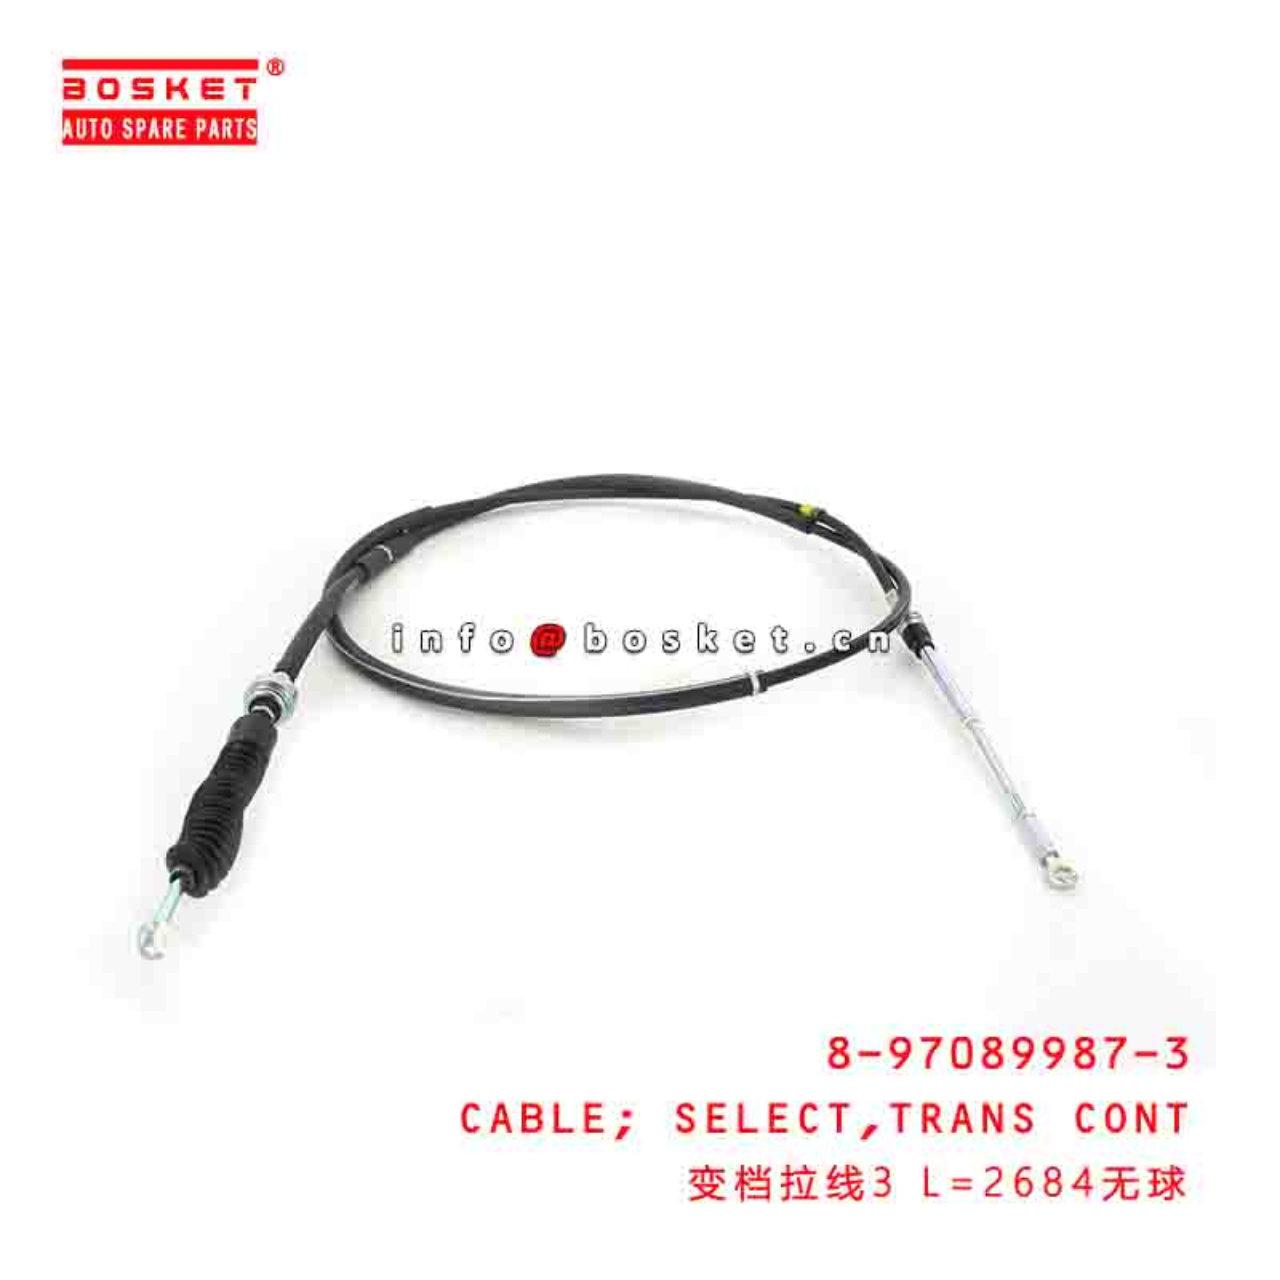 8-97089987-3 8970899873 TRANSMISSION CONTROL SELECT CABLE 3 L=2684 Suitable FOR ISUZU NKR55 4JB1 MSB